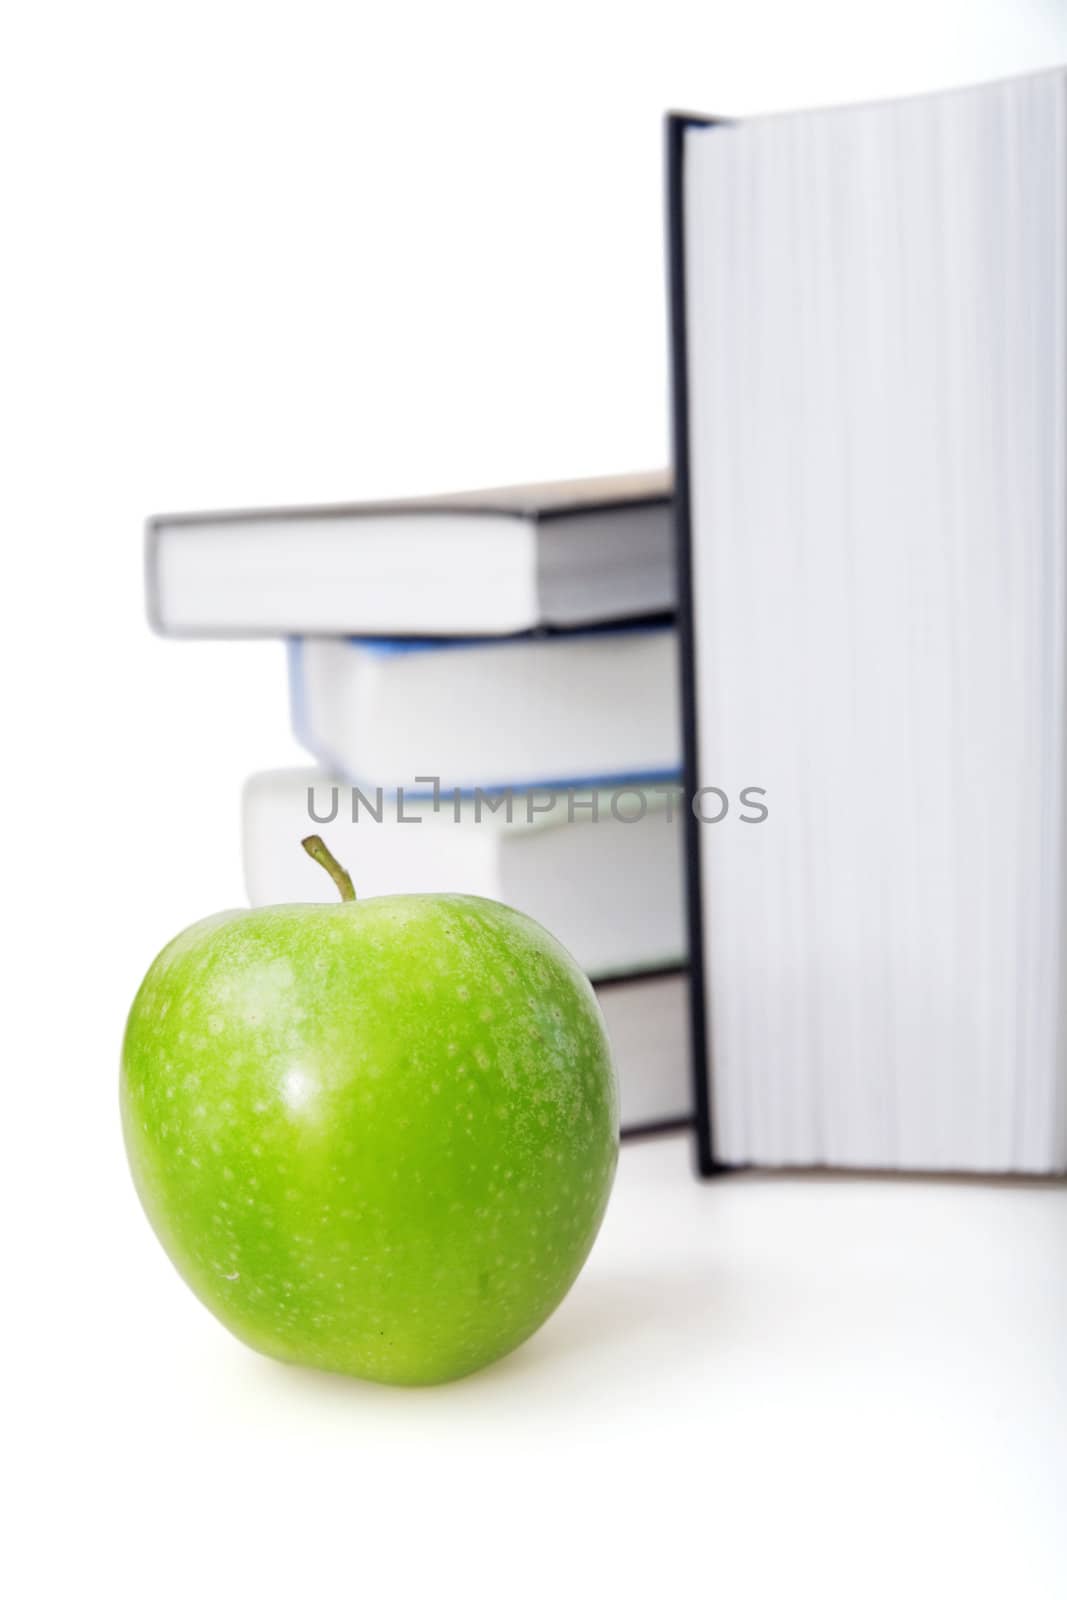 Bright green apple and books on a background by Serp